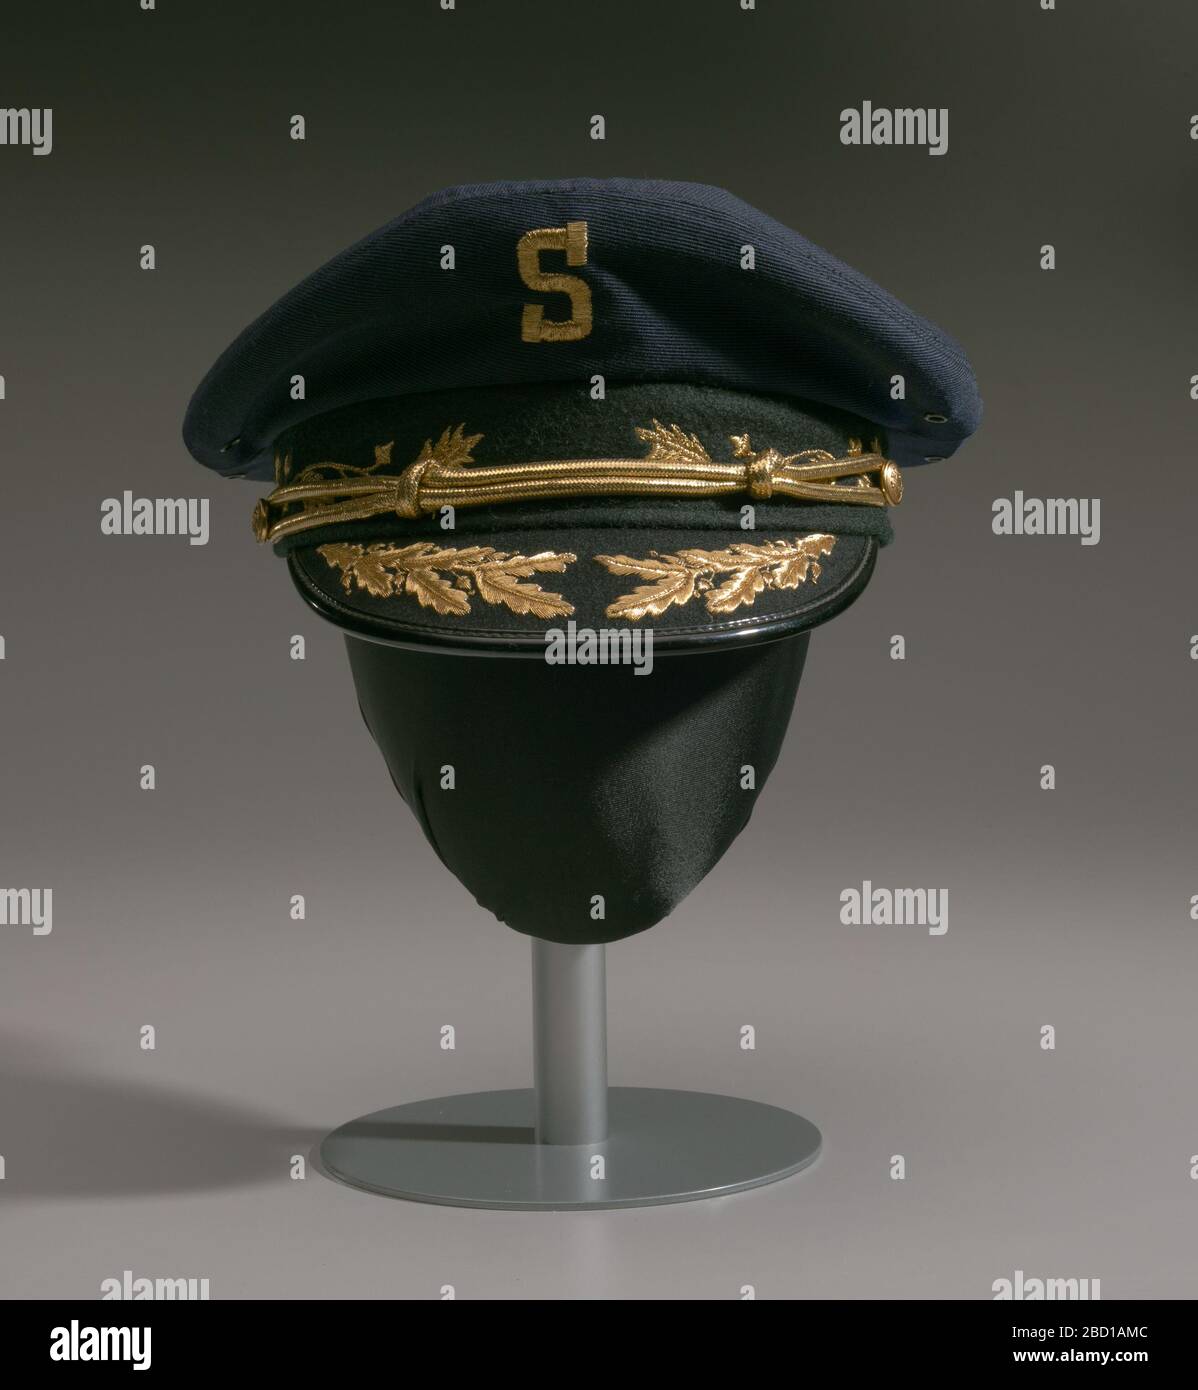 Hat worn by Dr Issac Greggs with The Human Jukebox marching band. A hat worn by Dr. Issac Ben Greggs, the Director of the Southern University - Baton Rouge marching band nicknamed 'The Human Jukebox.' The military-style peaked cap has a navy crown with an gold embroidered “S” at center front. Hat worn by Dr Issac Greggs with The Human Jukebox marching band Stock Photo